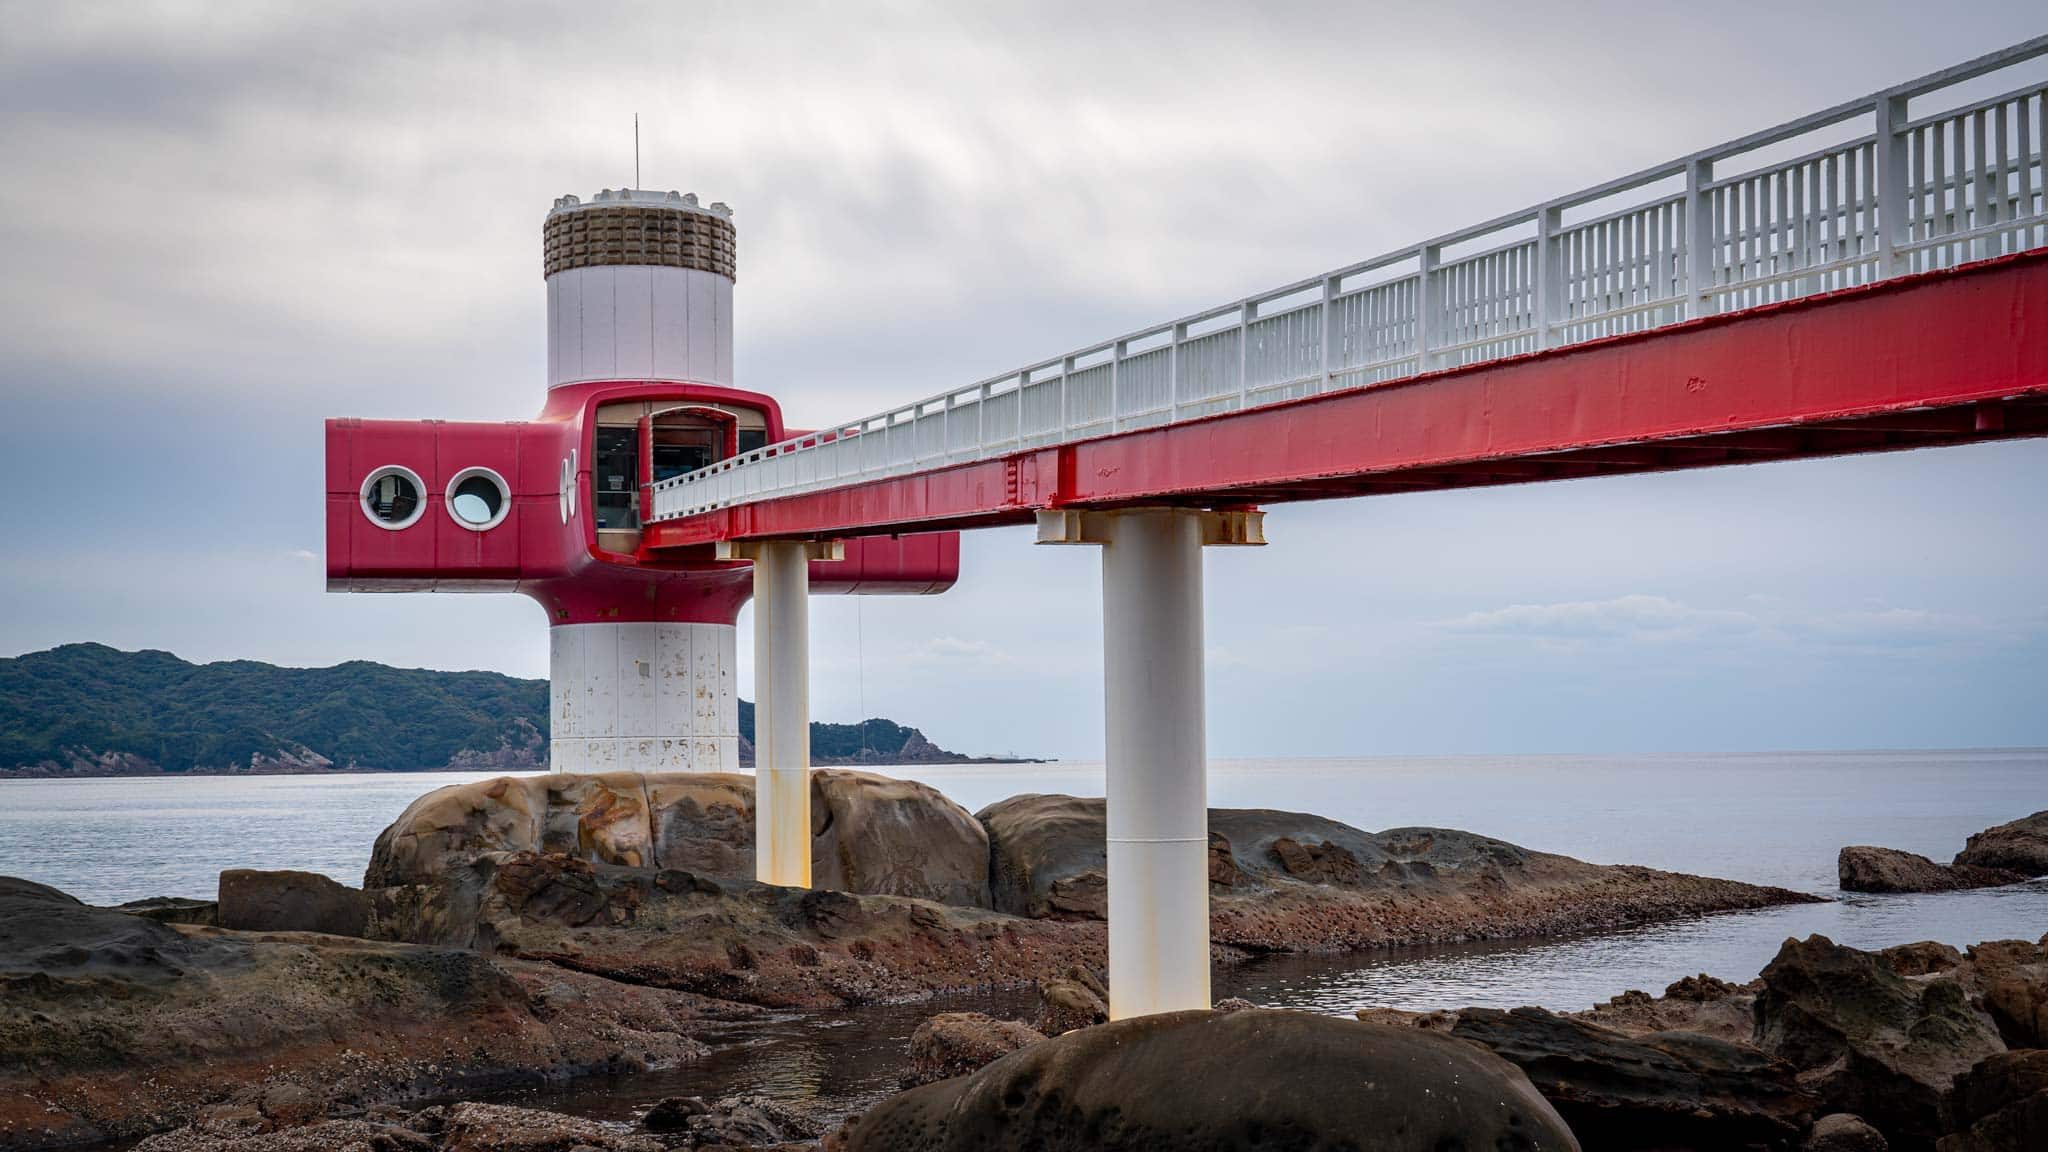 The red and white underwater observatory is quite unique